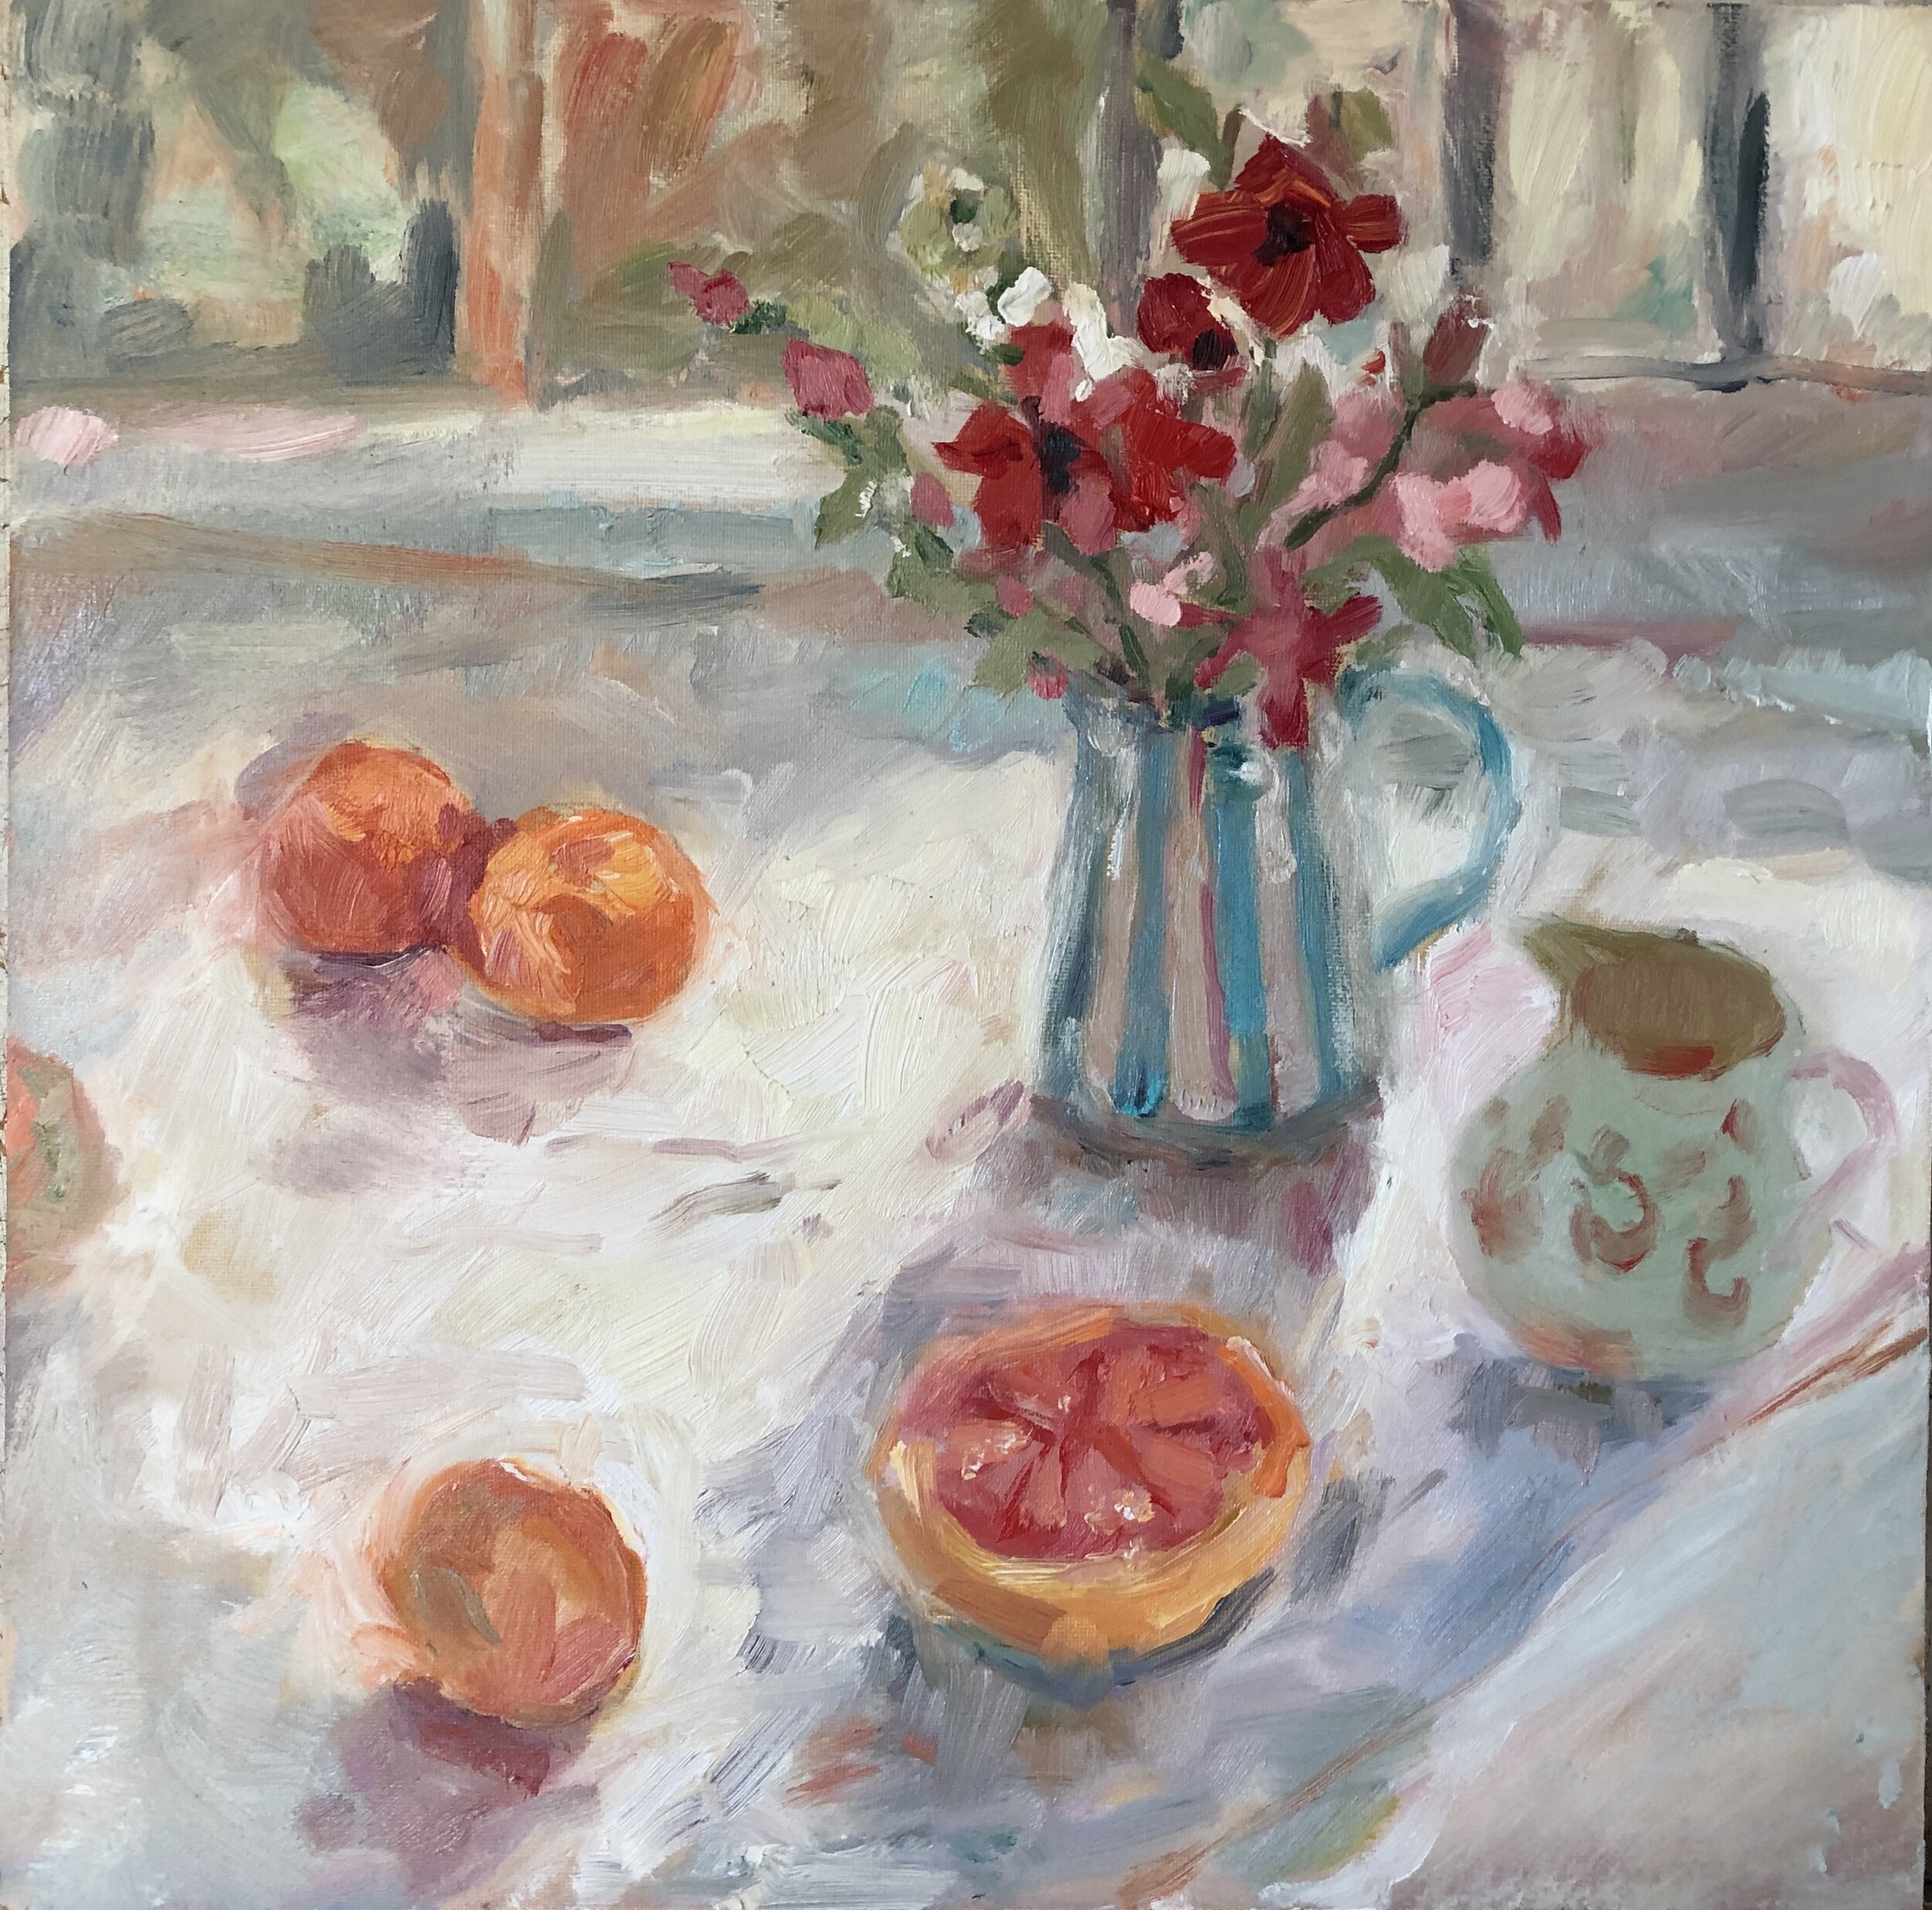 A Sunny Breakfast 30 x 30cm. Sold